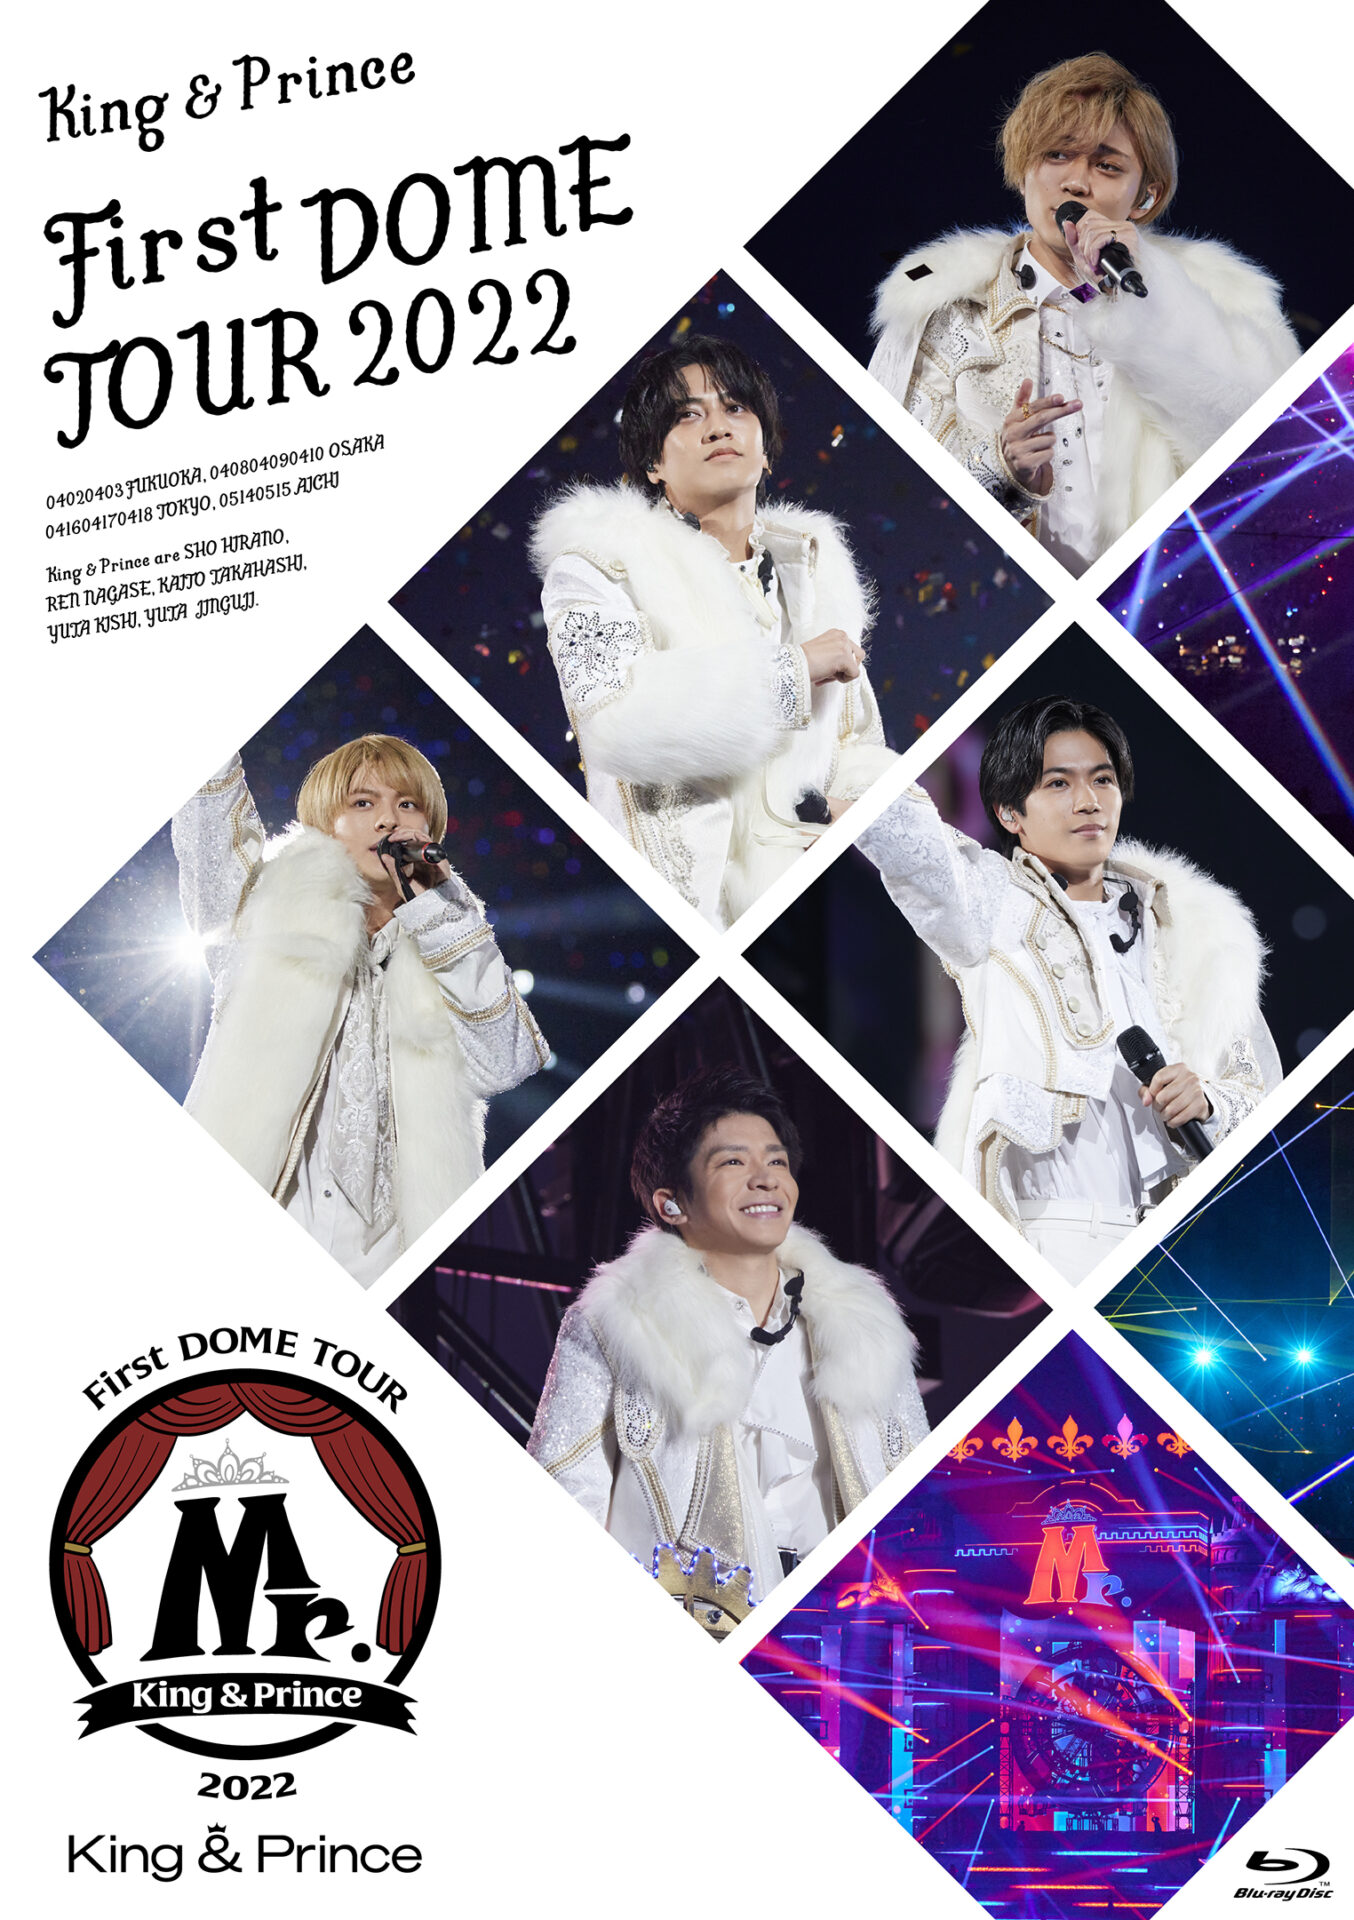 『King & Prince First DOME TOUR 2022 〜Mr.〜』ジャケット